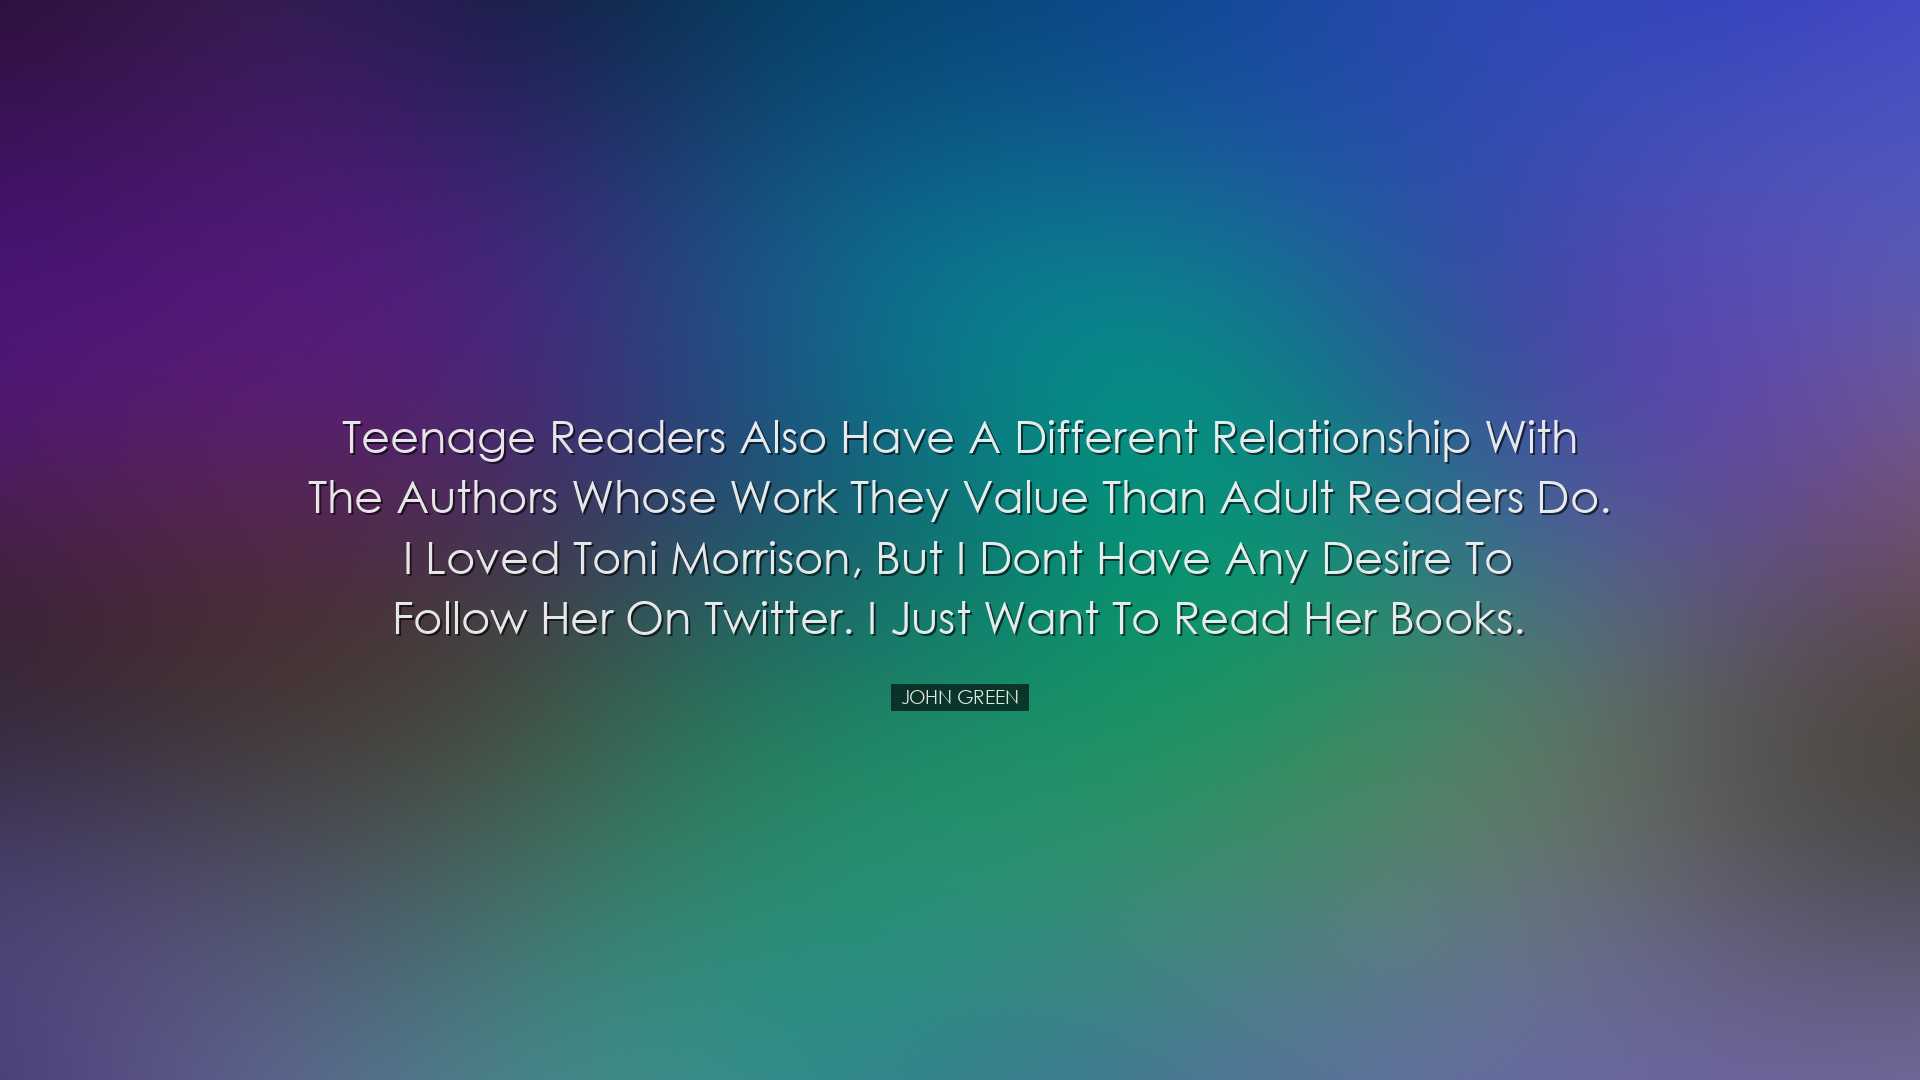 Teenage readers also have a different relationship with the author